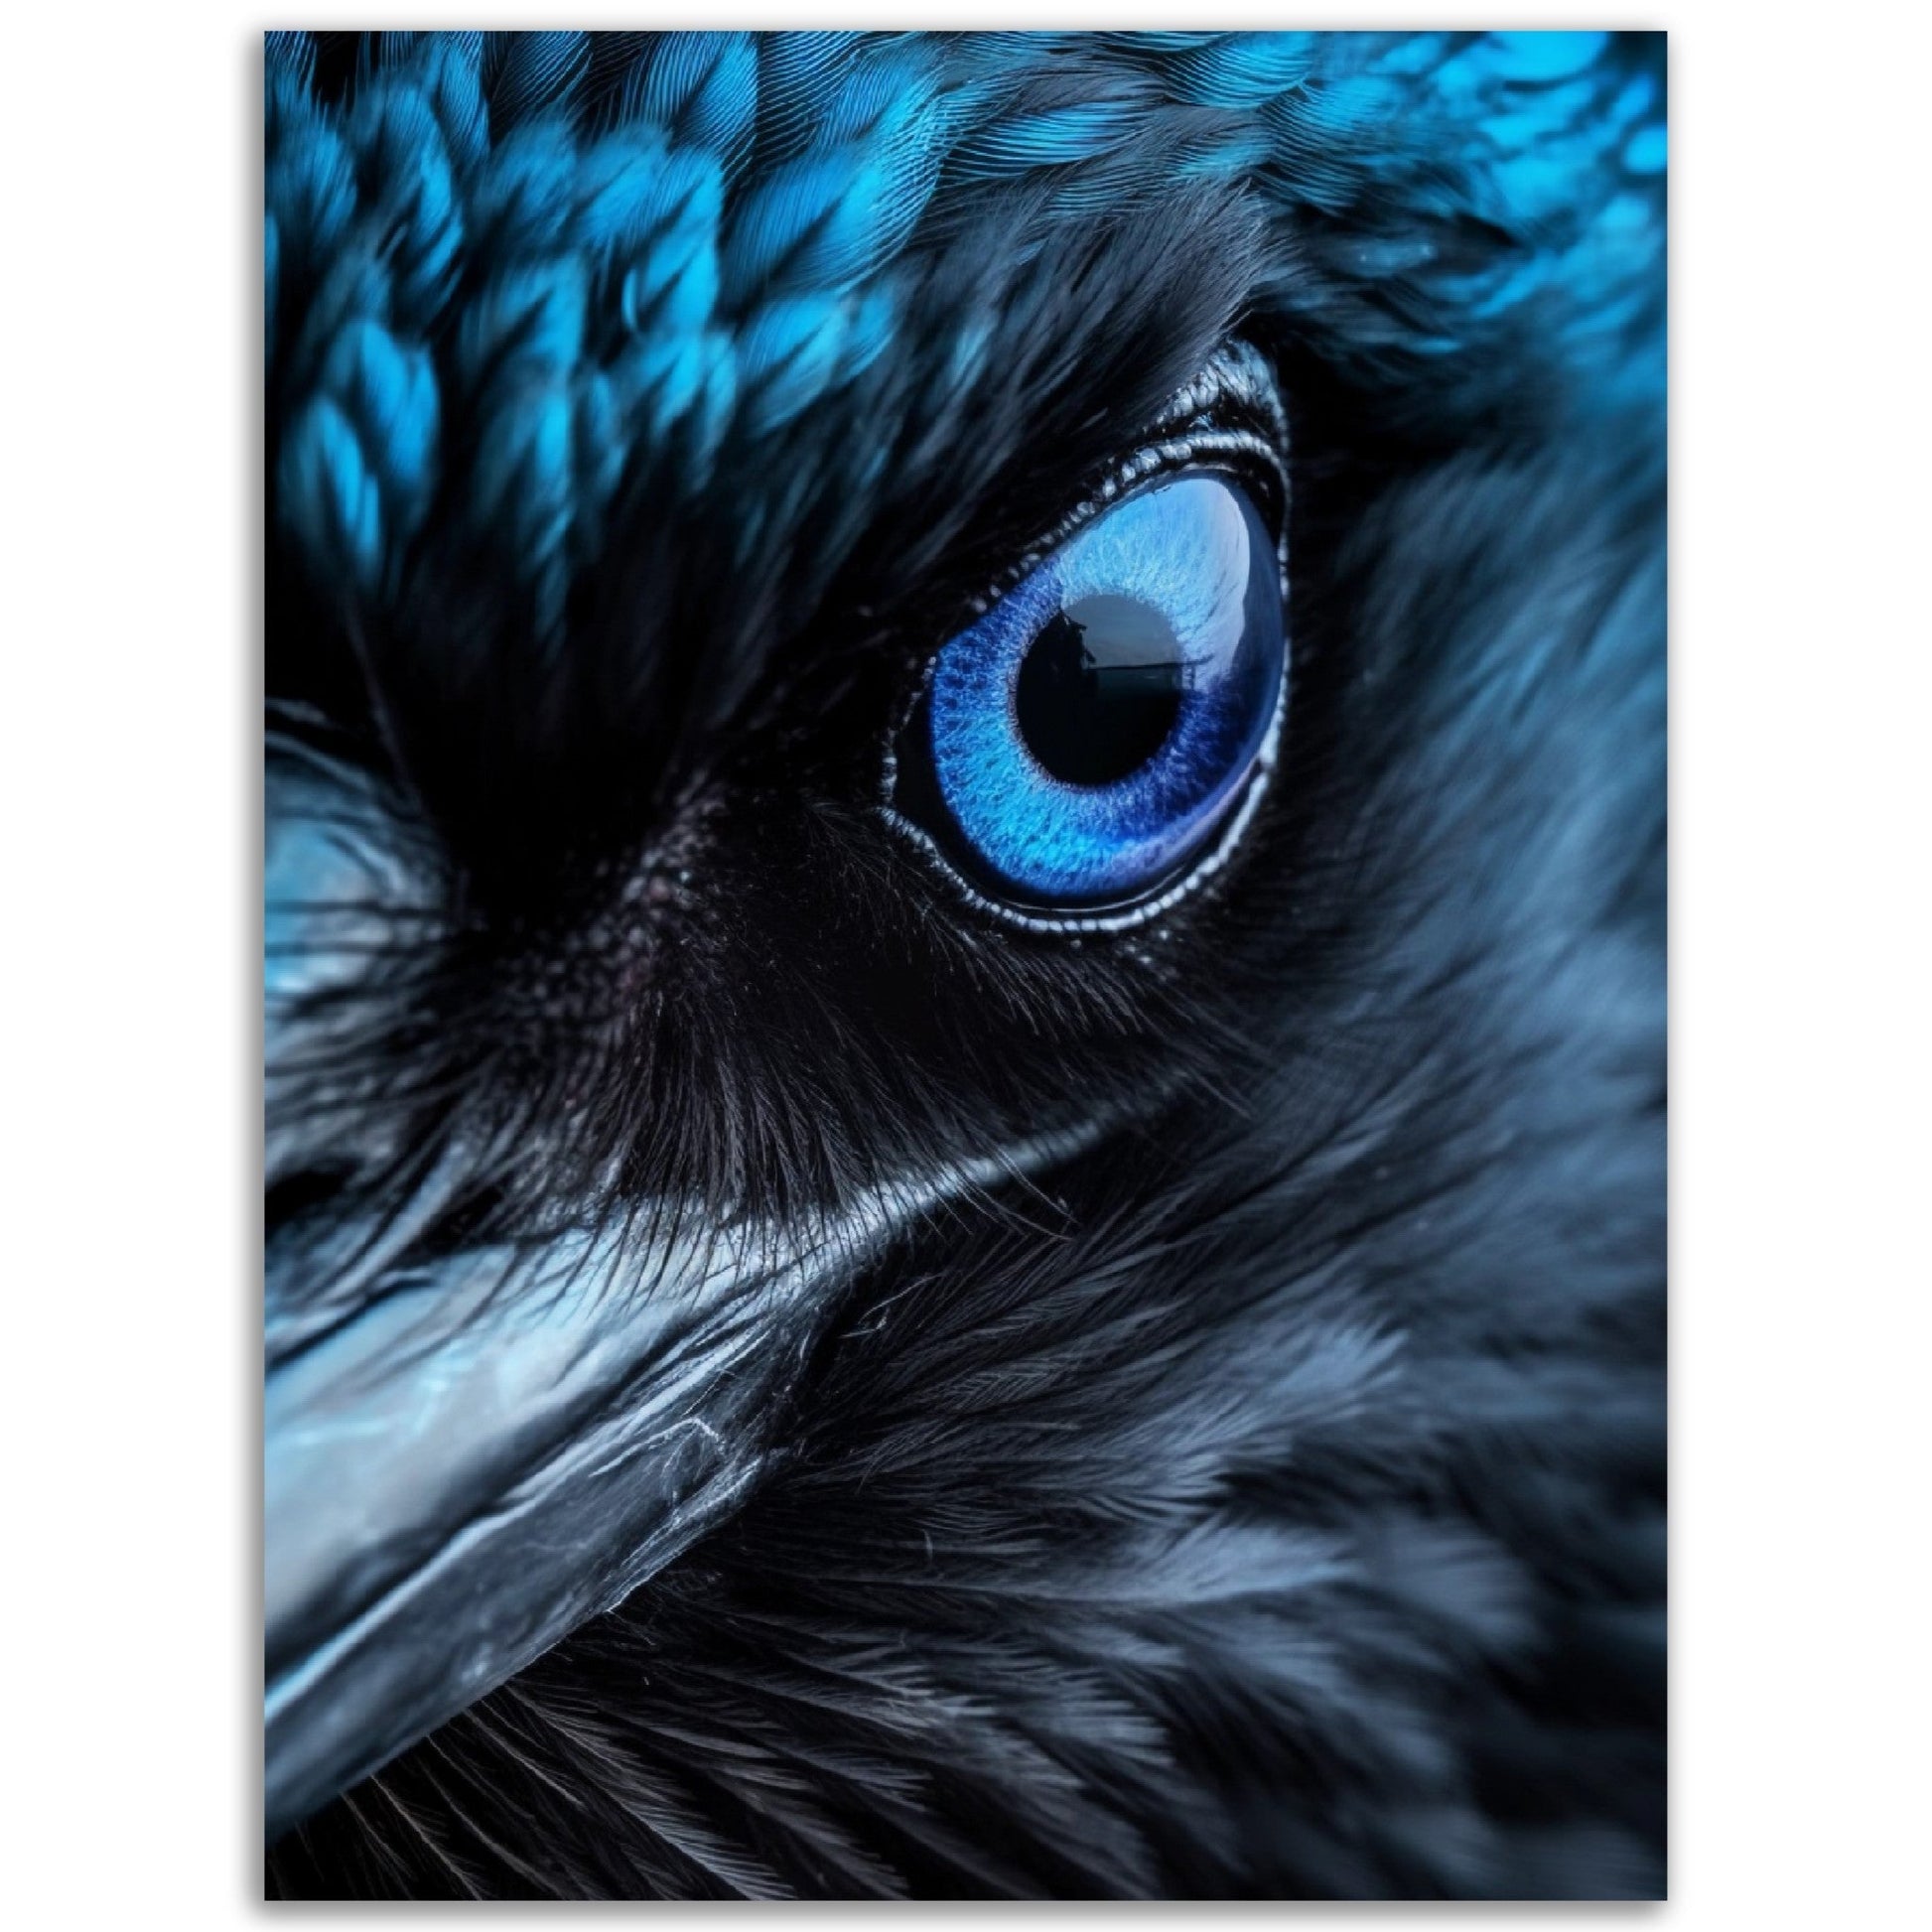 A close up of Odin's Raven eye with Pop Art blue eyes, perfect for high quality posters for room decor or poster wall art.